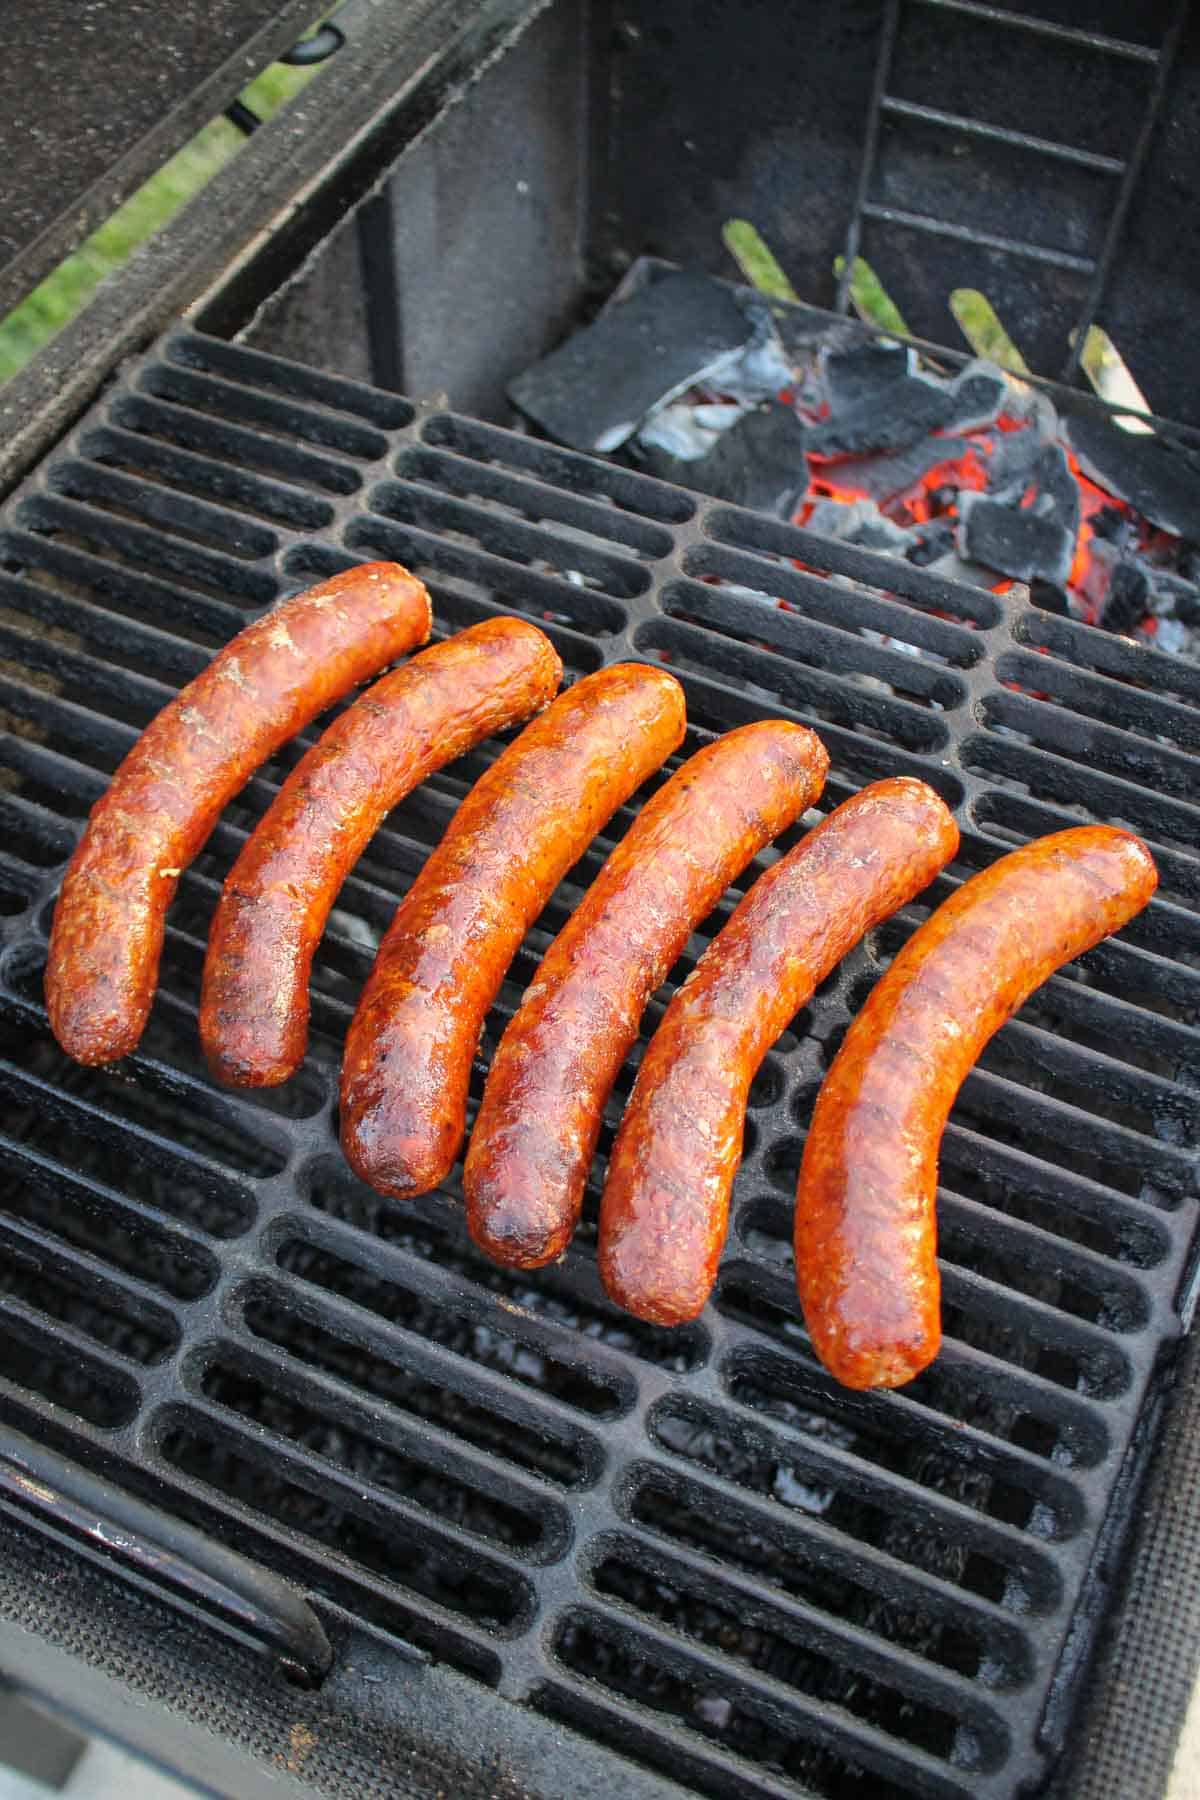 Cooking up the chorizo hot dogs.